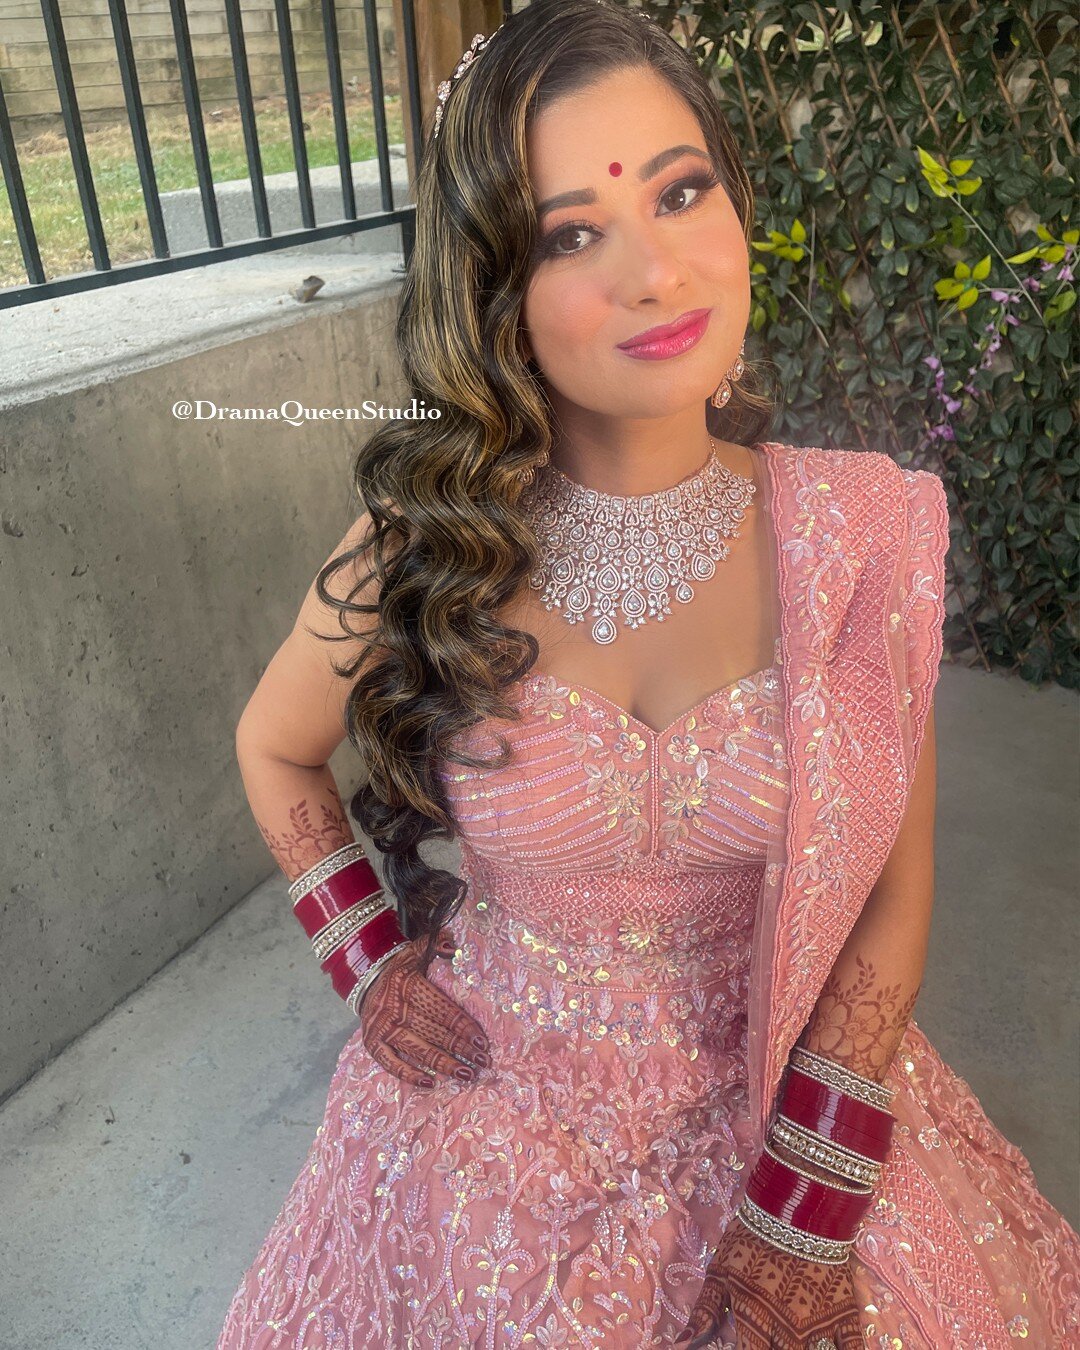 💖💖💖 Beautiful Komal  #Queened 👑 
Makeup Kiran @dramaqueenstudio
DQS Team  @dramaqueenstudio
Mehindi @hennabysapreet 
Jewellery @parasfashions 
Outfit @prashbride 
Booking bridal and non-bridal for 2022 and 2024.
Please send all inquiries to 
dram